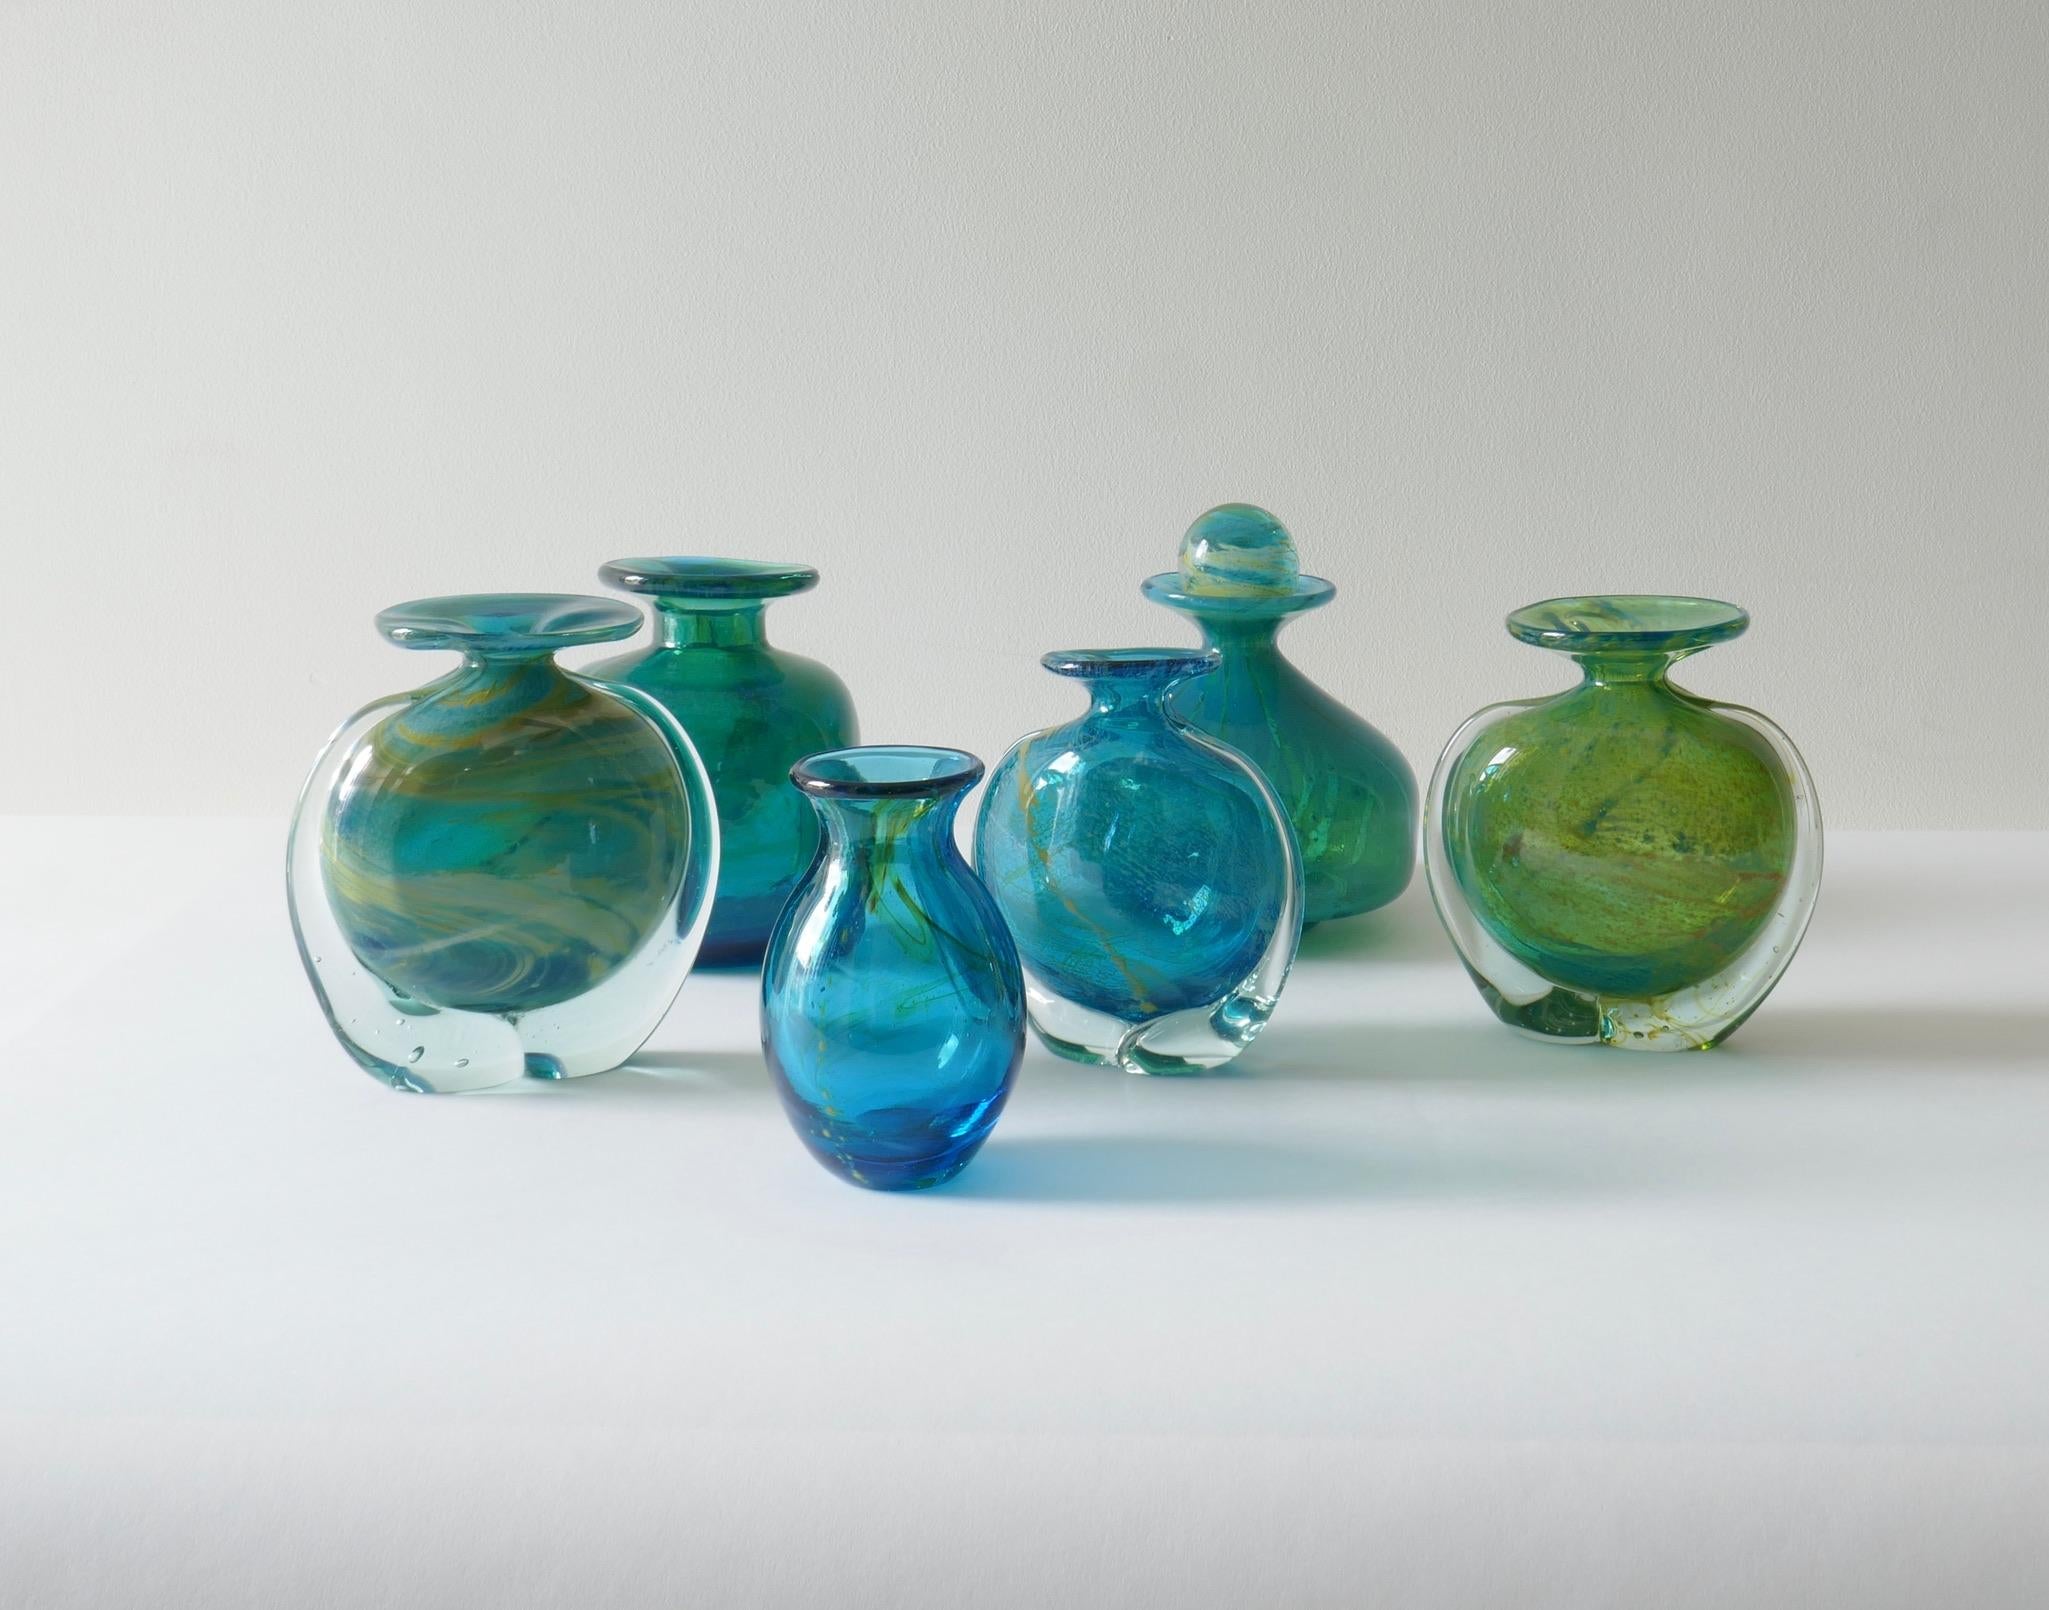 Set of 6 Mdina turquoise blue and green glass vases, 1960s. 
Dimensions from left to right :
H 15 cm, D 13cm 
H 14.5 cm, W 15cm, D 5cm, signed 
H 17 cm, 14cm, signed
H 14cm, W 13cm, D 5cm
H 13cm, W 12cm, D 5cm, signed
H12cm, D 7cm.
 